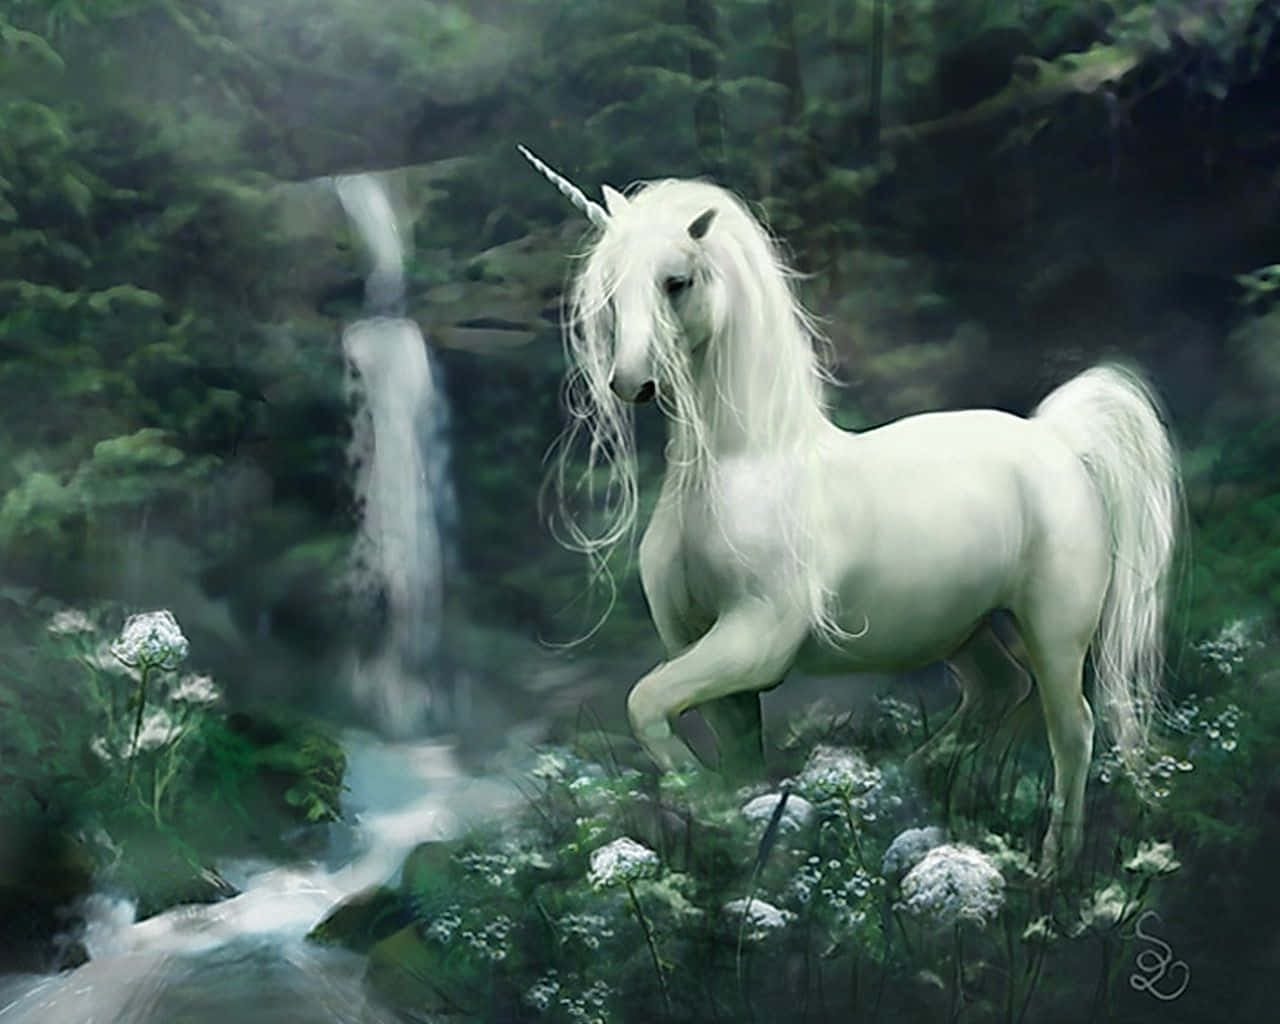 Magical Real Unicorn Glimpsed In A Fantasy World